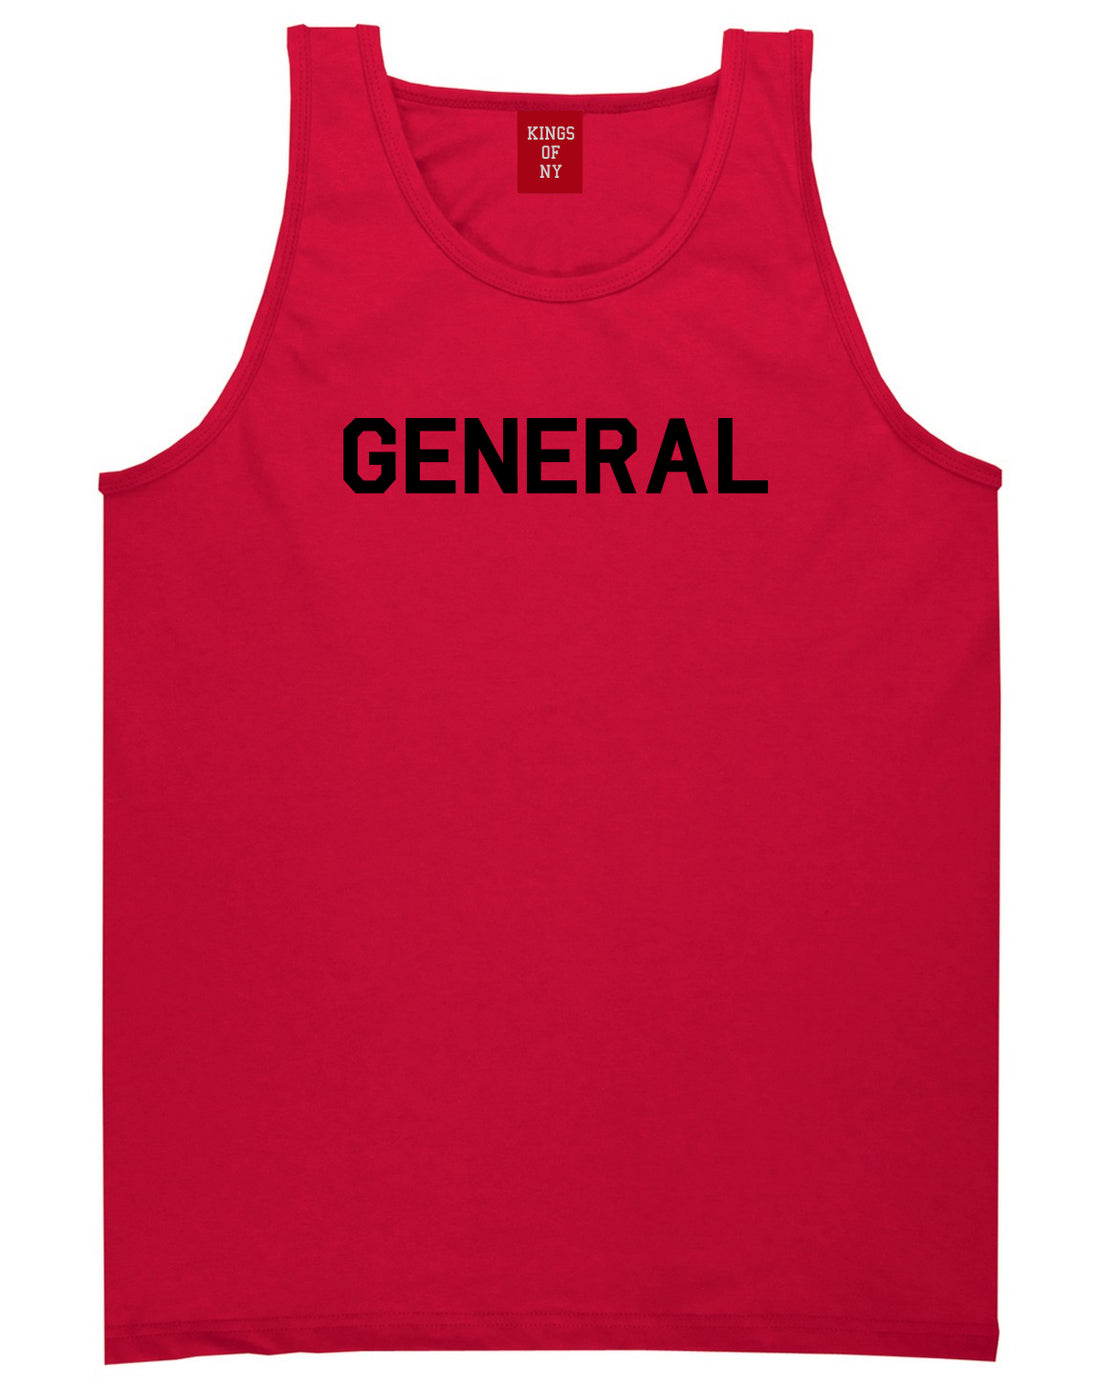 US General WW2 Mens Red Tank Top Shirt by KINGS OF NY